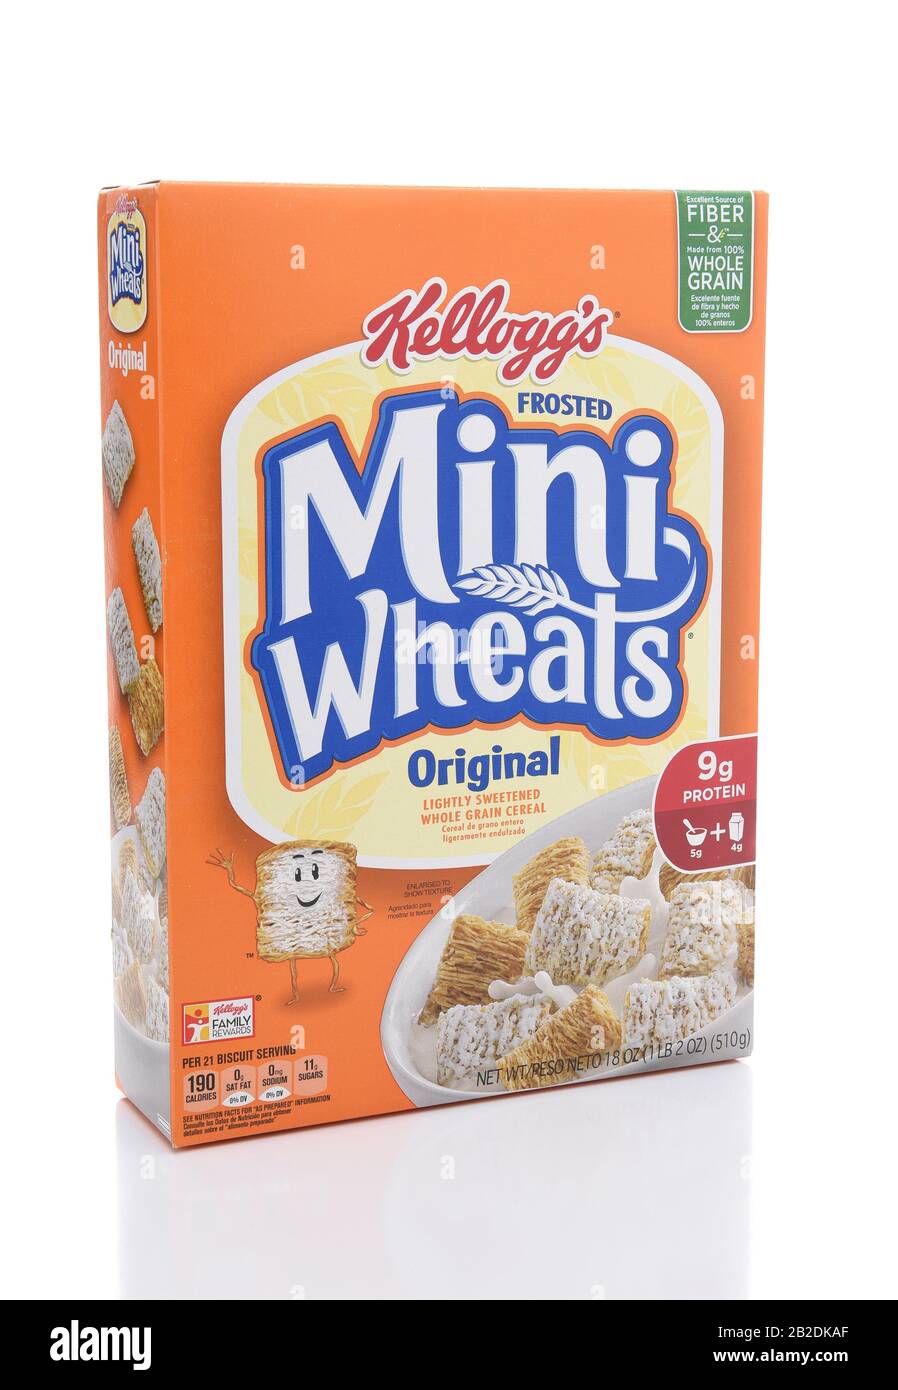 IRVINE, CALIFORNIA - JULY 10, 2017: Kelloggs Frosted Mini-Wheats. The shredded wheat cereal is coated with a sweet sugary frosting. Stock Photo